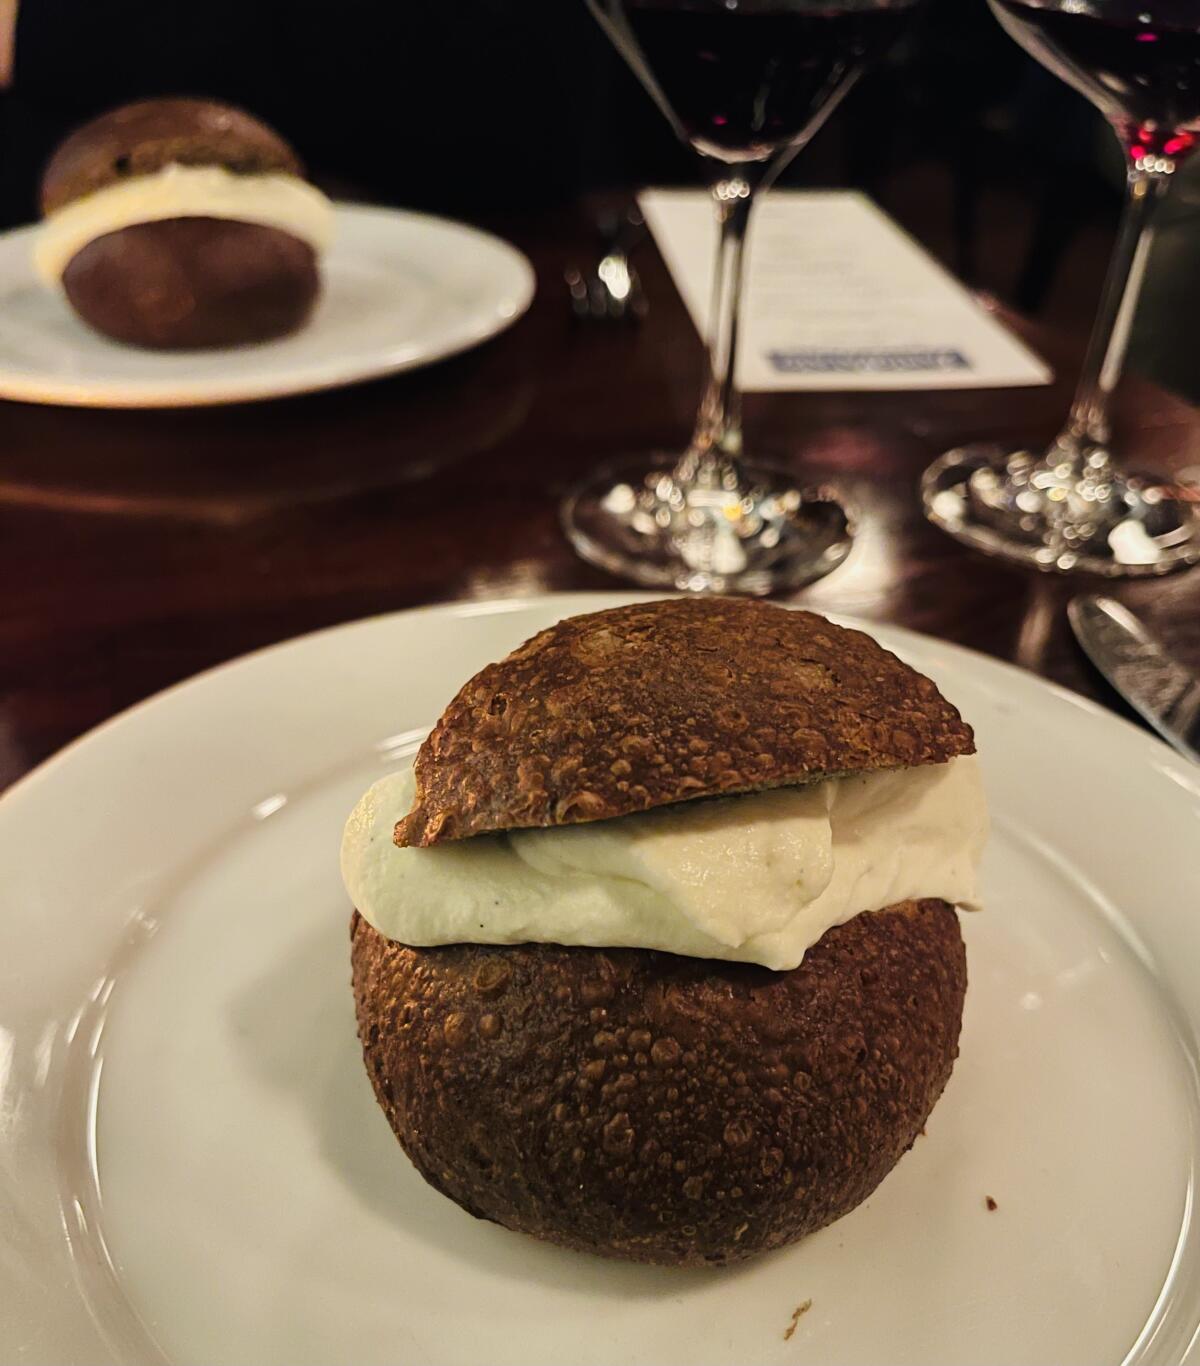 Cream-filled maritozzi made by Santo Palato's Sarah Cicolini for a special dinner at Chi Spacca in Los Angeles.